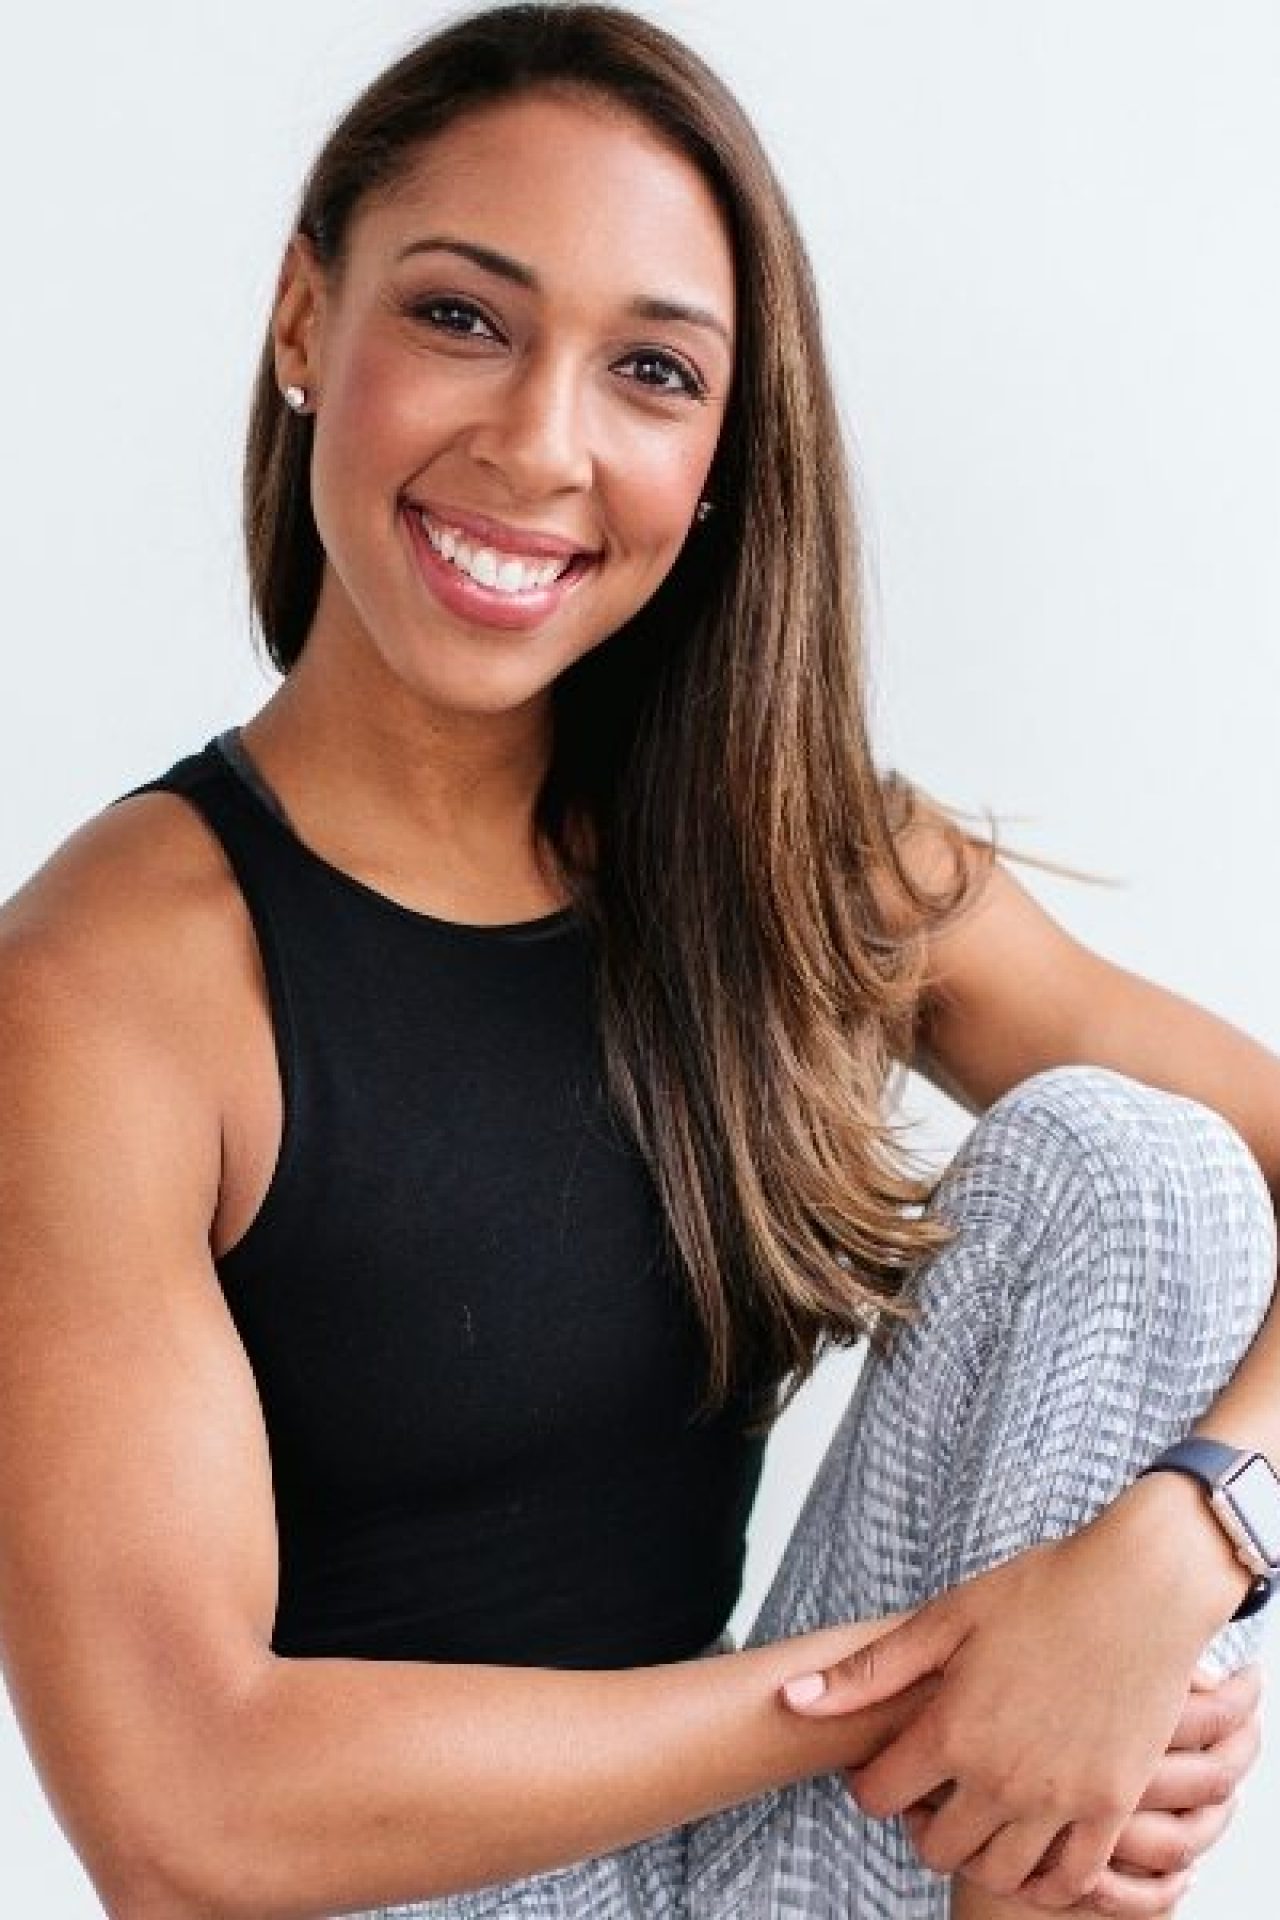 Philly Fit Pro Jayel Lewis Just Launched a New Business. Here’s How She Got Started.